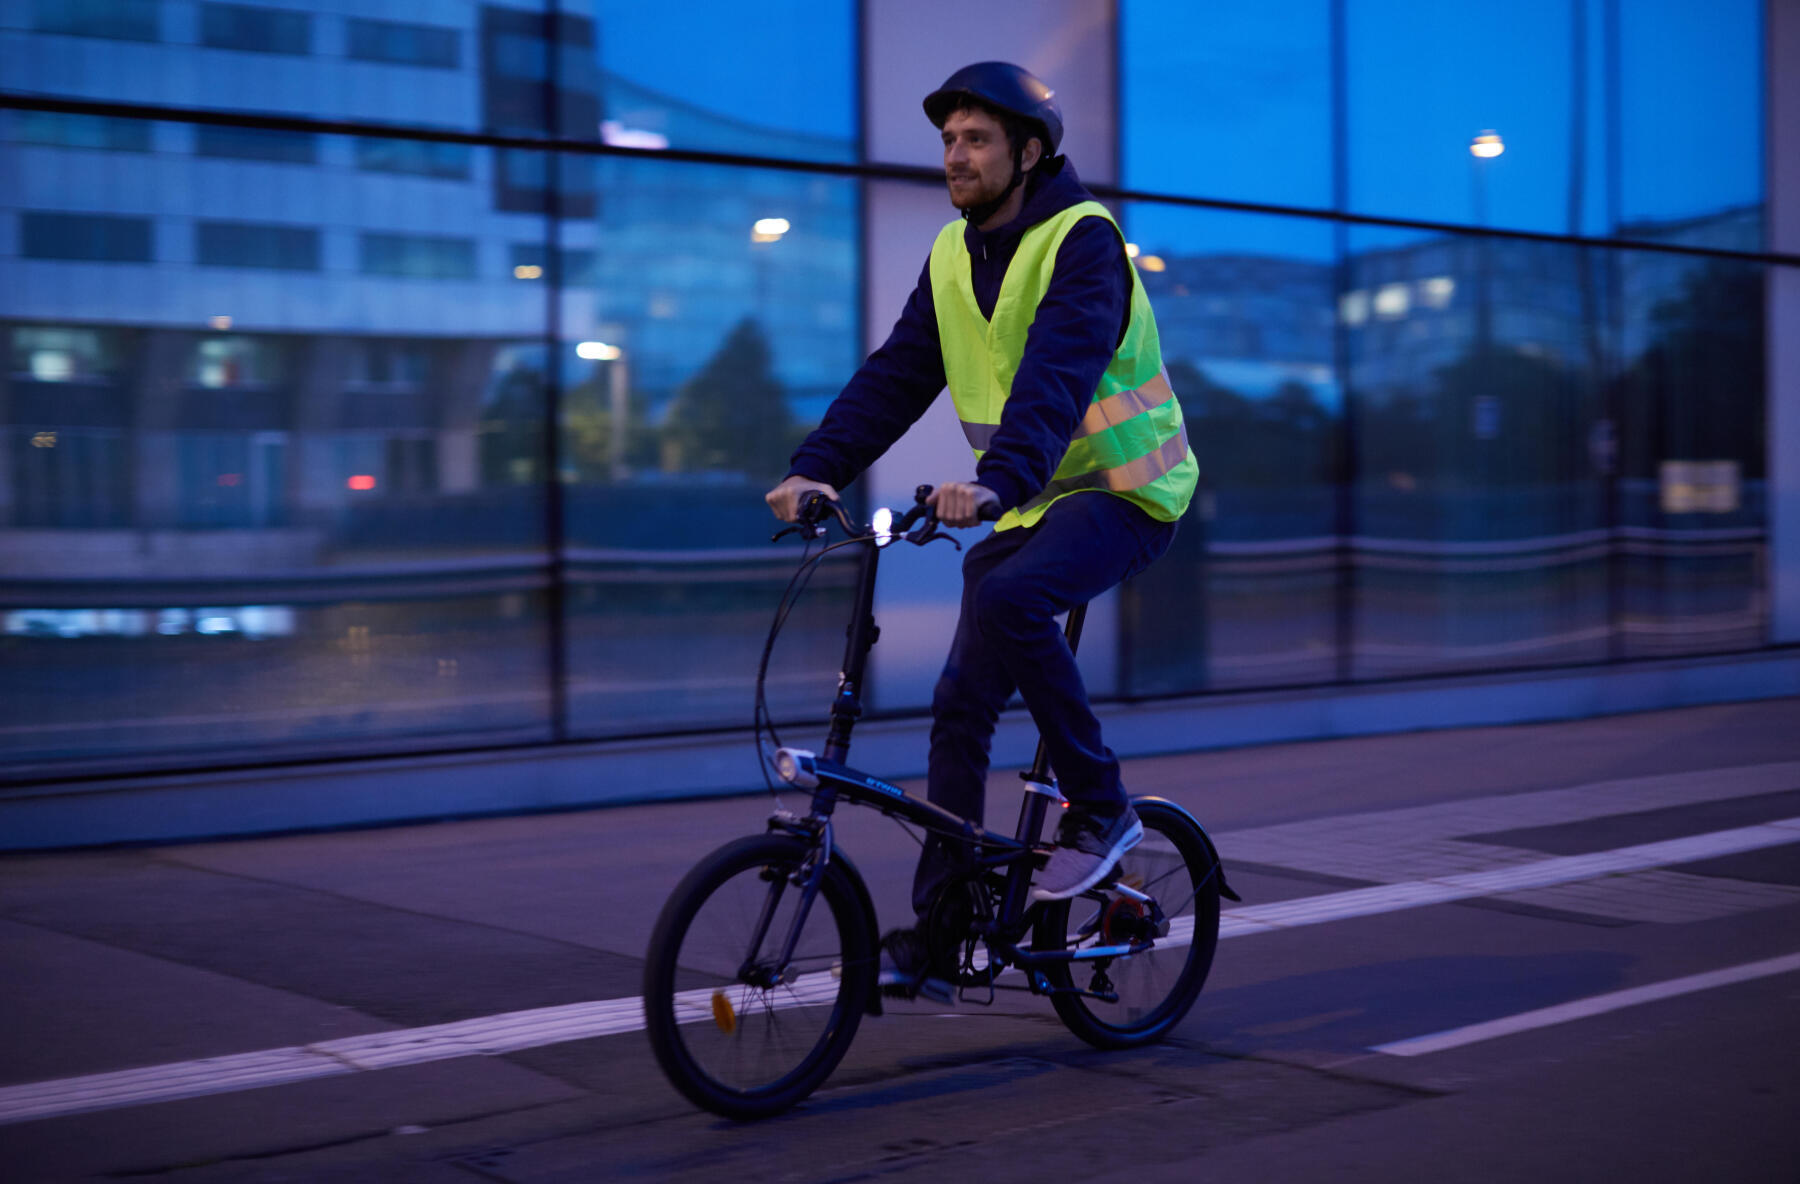 Cyclist should wear suitable equipment and show bike light in the evening